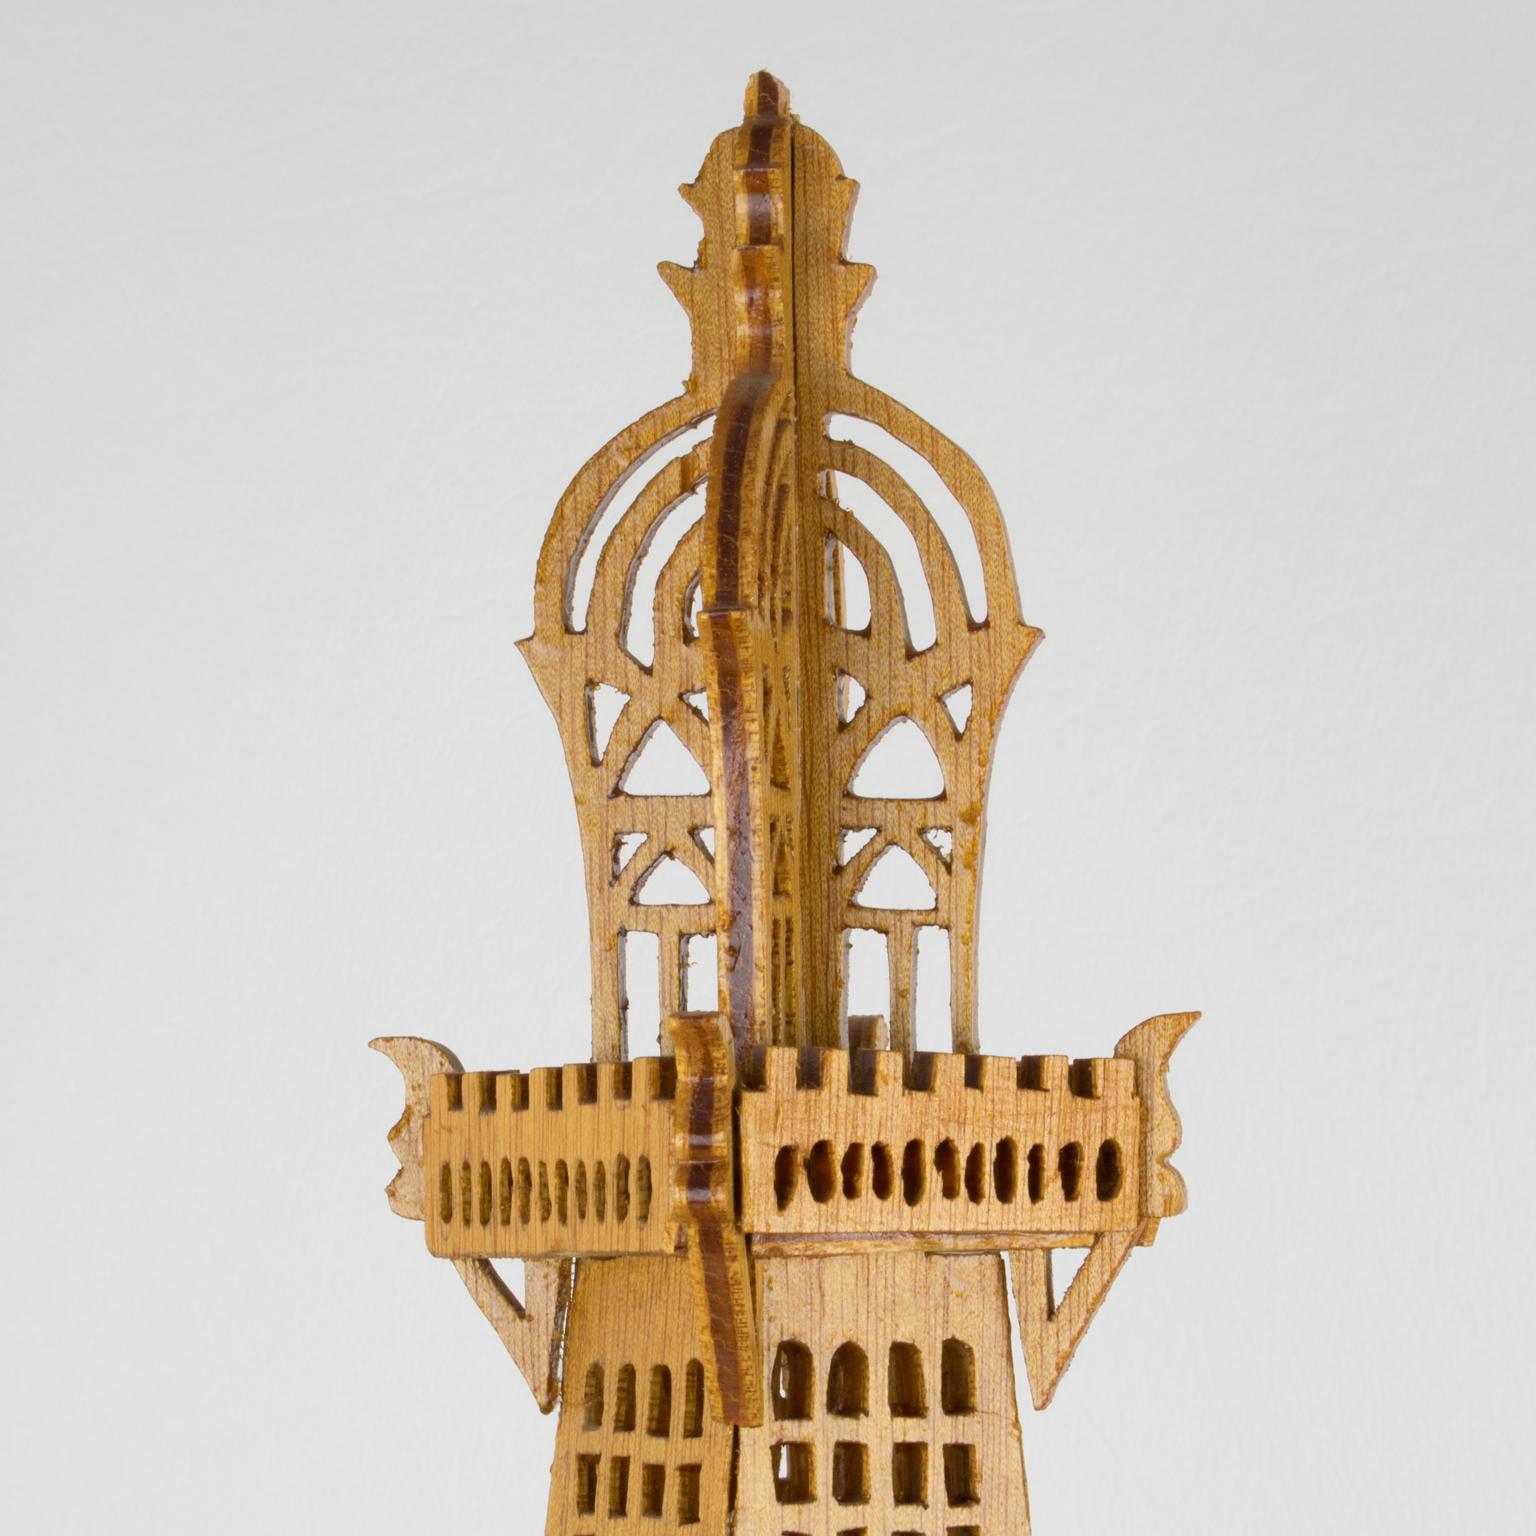 French Hand-Carved Wooden Eiffel Tower Model Miniature Sculpture 11